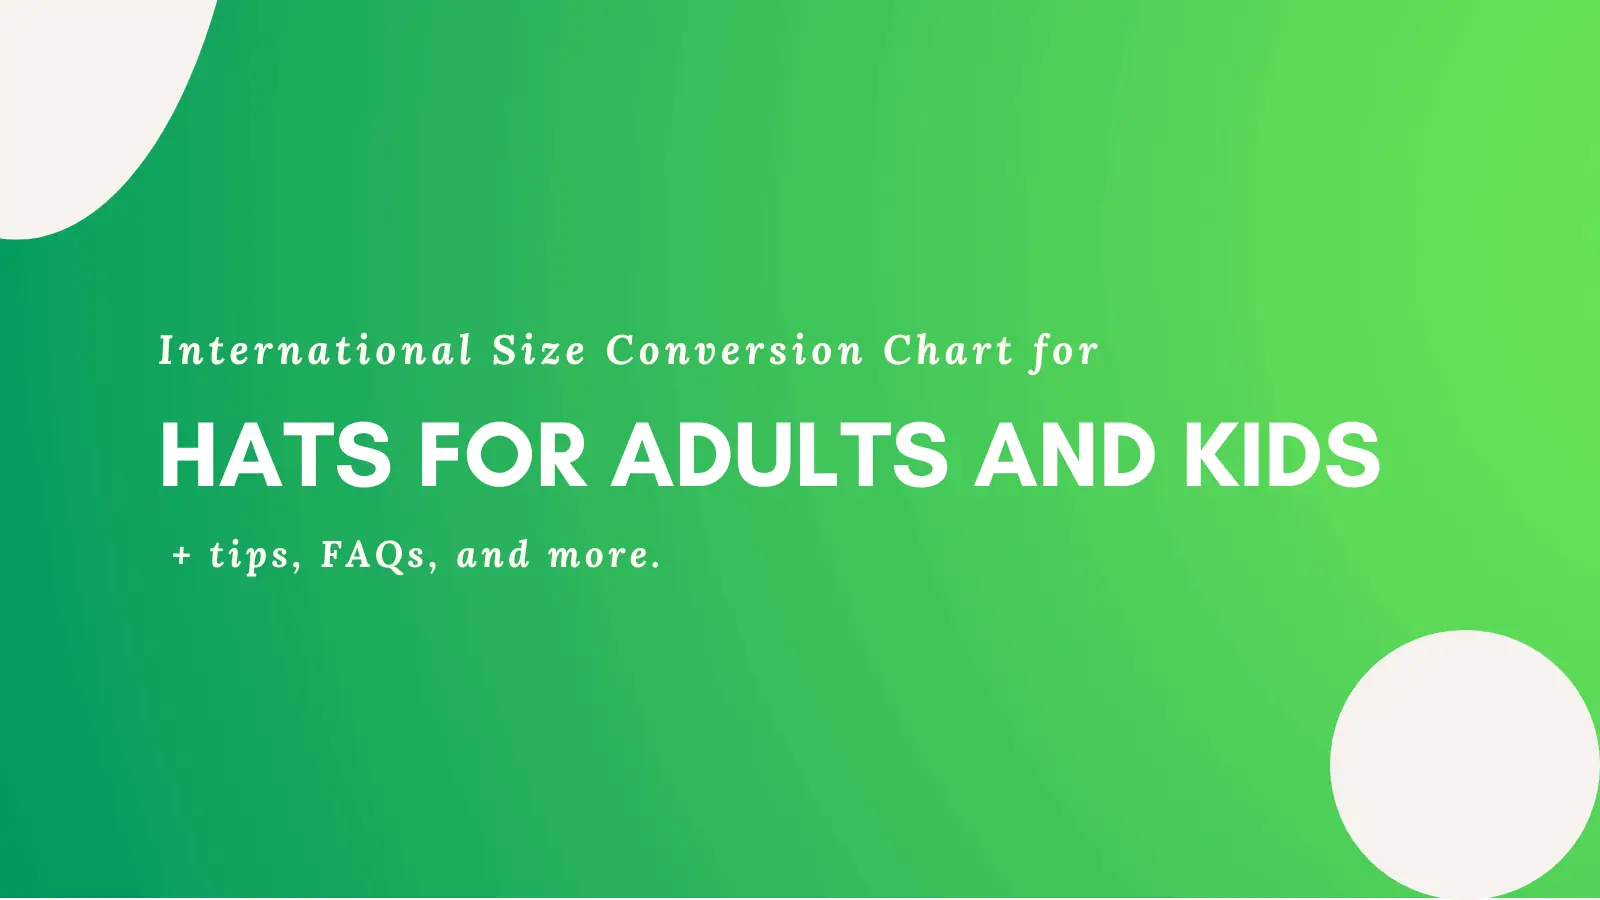 International Size Conversion Charts for Hats for Adults and Kids